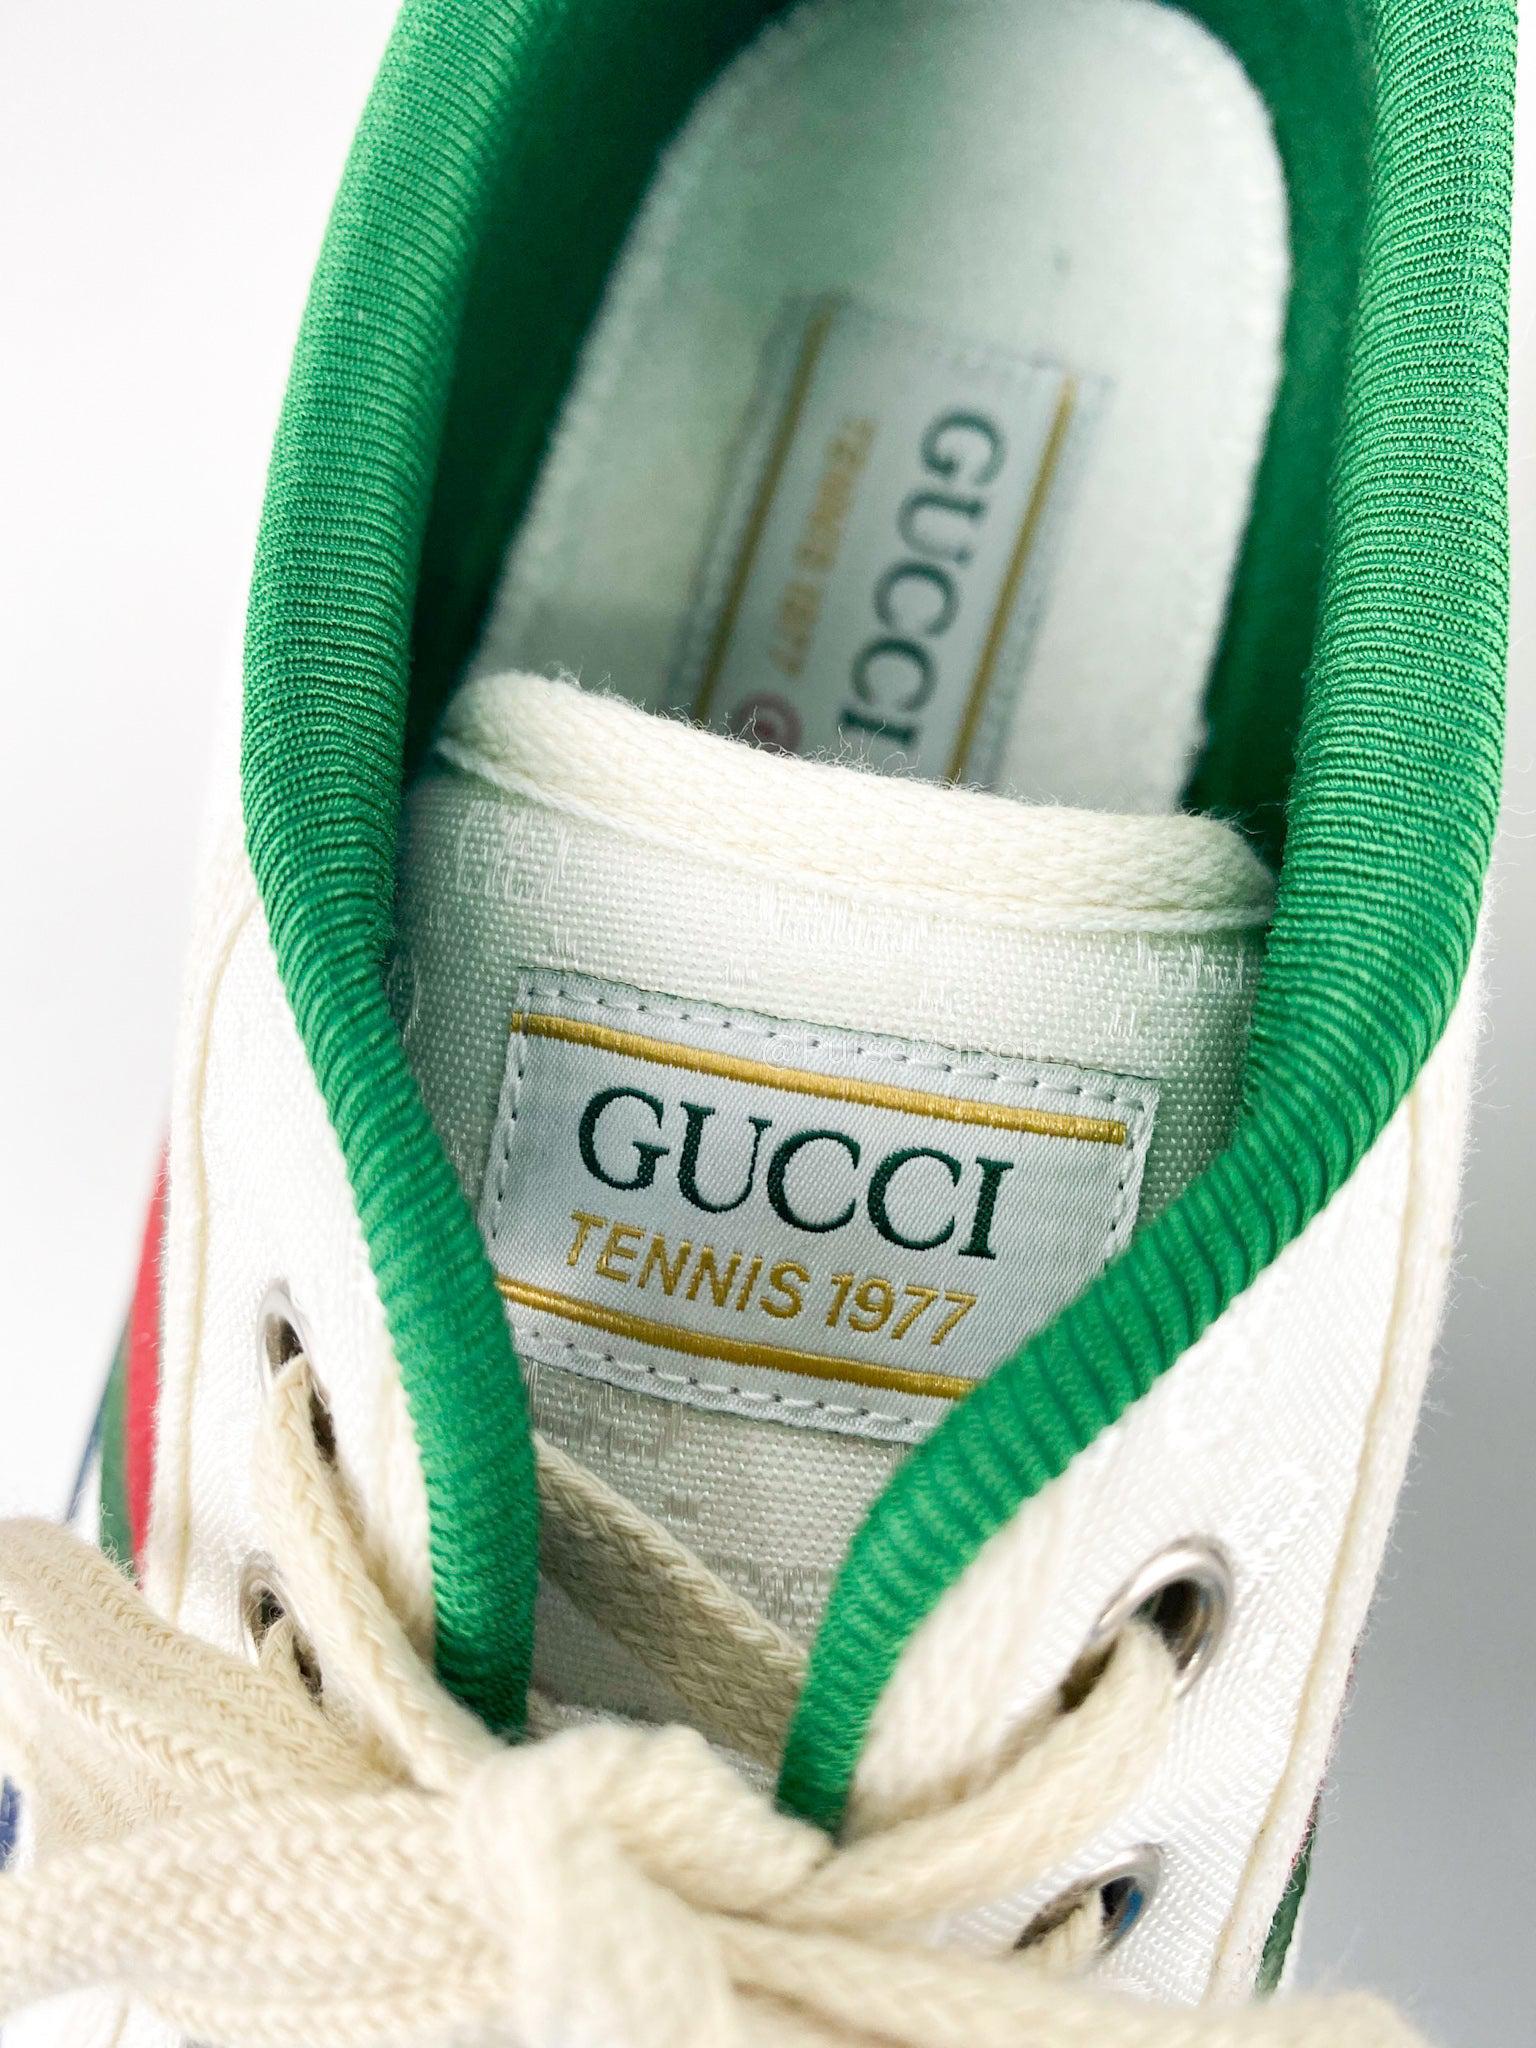 Gucci Tennis 1977 Series White Sneakers for Men (Size 6 US, 28cm)